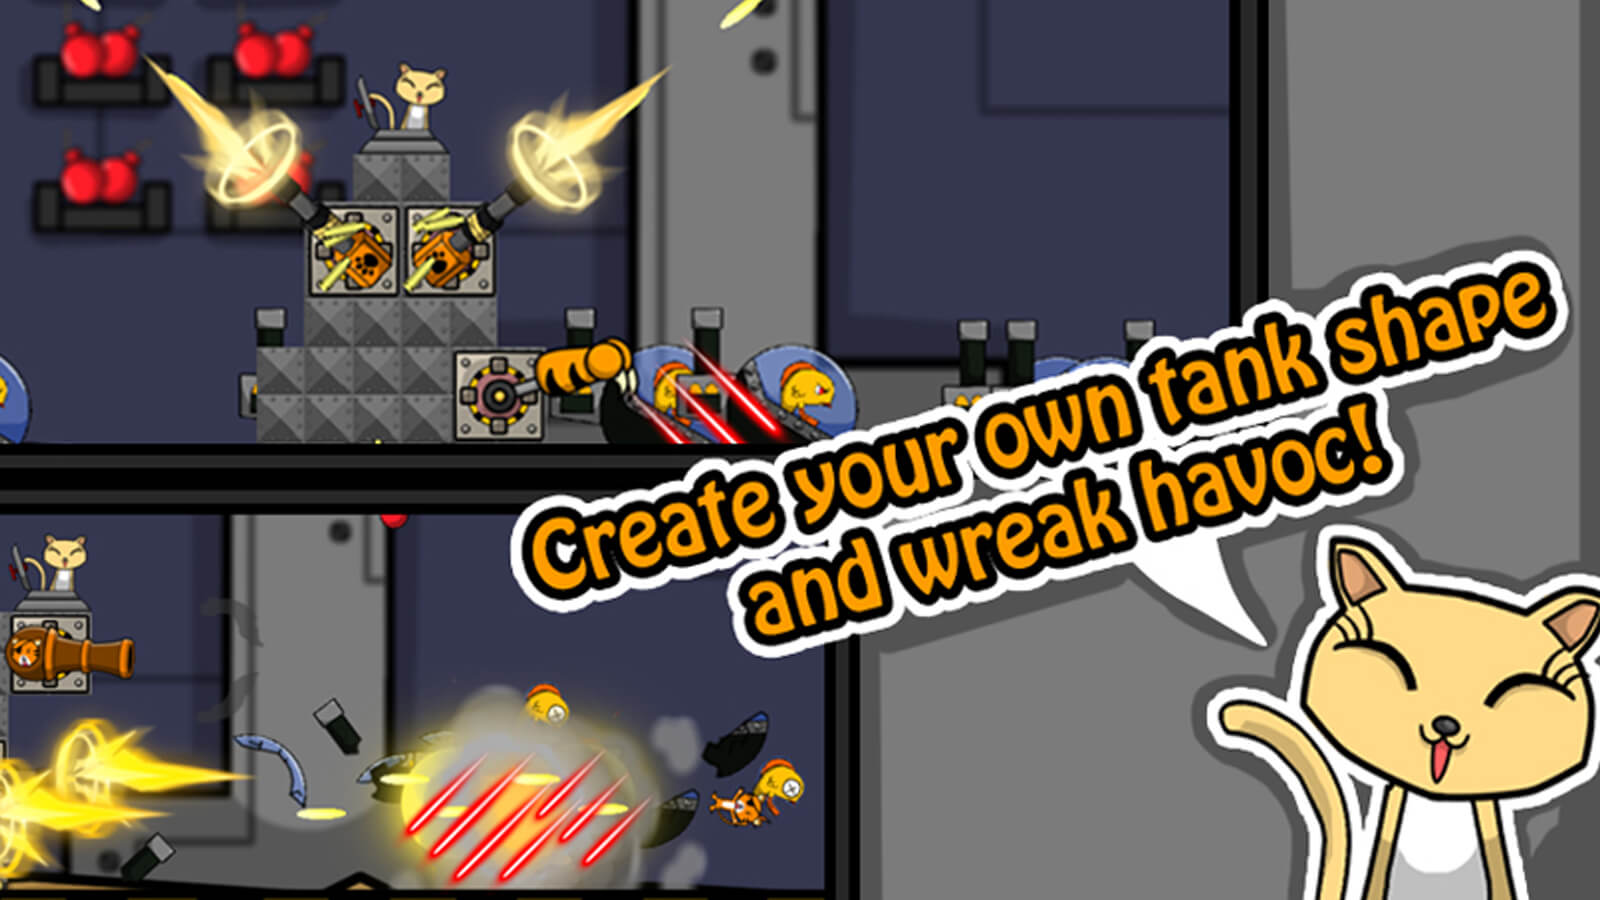 Screenshots of kitten-piloted battle tank firing at enemies. The words "Create your own tank shape and wreak havoc!" appears